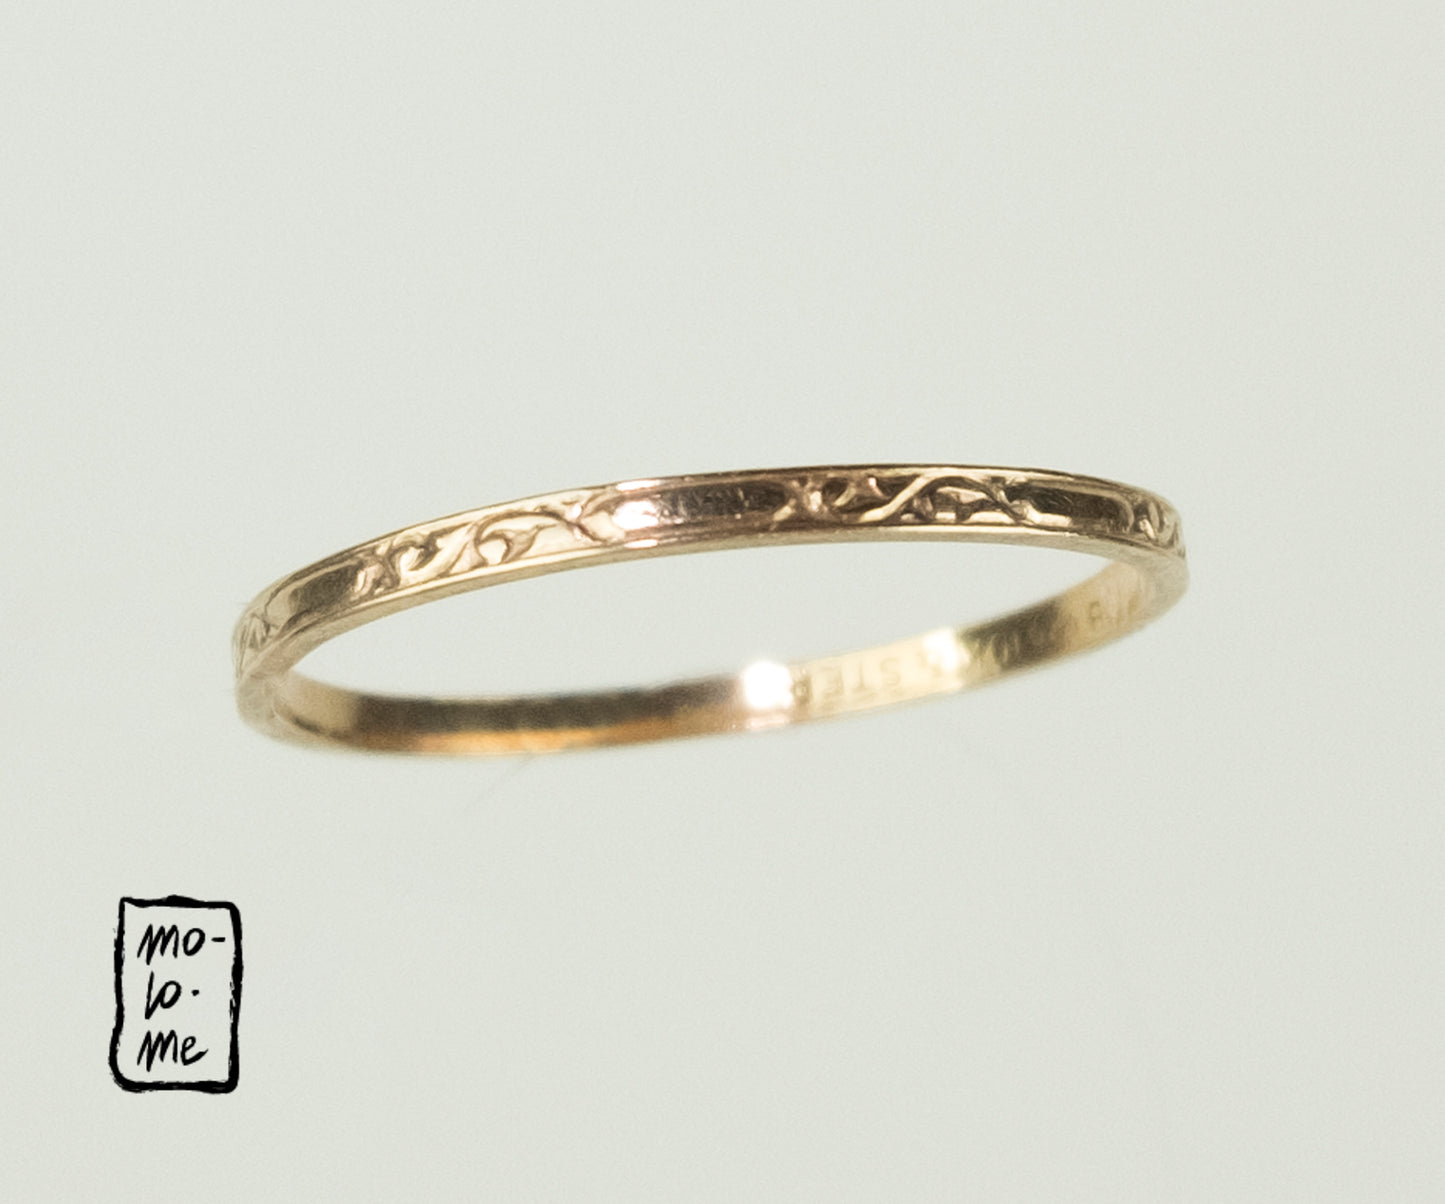 Vintage Skinny Engraved Gold-Plated Stacking Rings by Molo Me close up